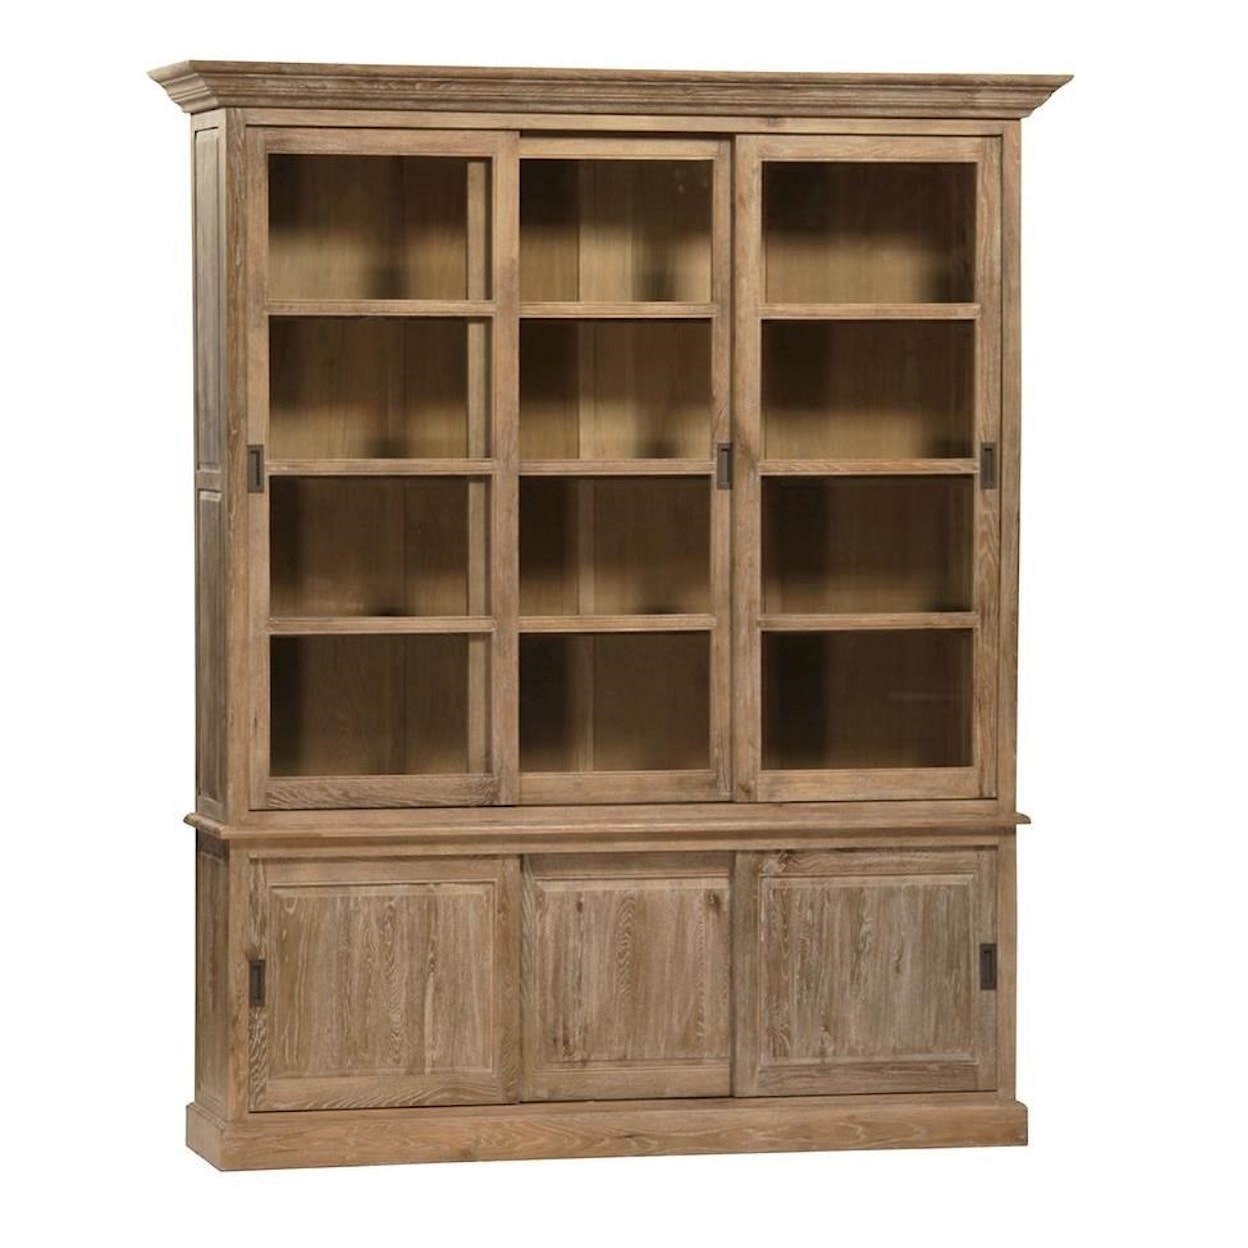 Dovetail Furniture Cabinets Dundee Cabinet